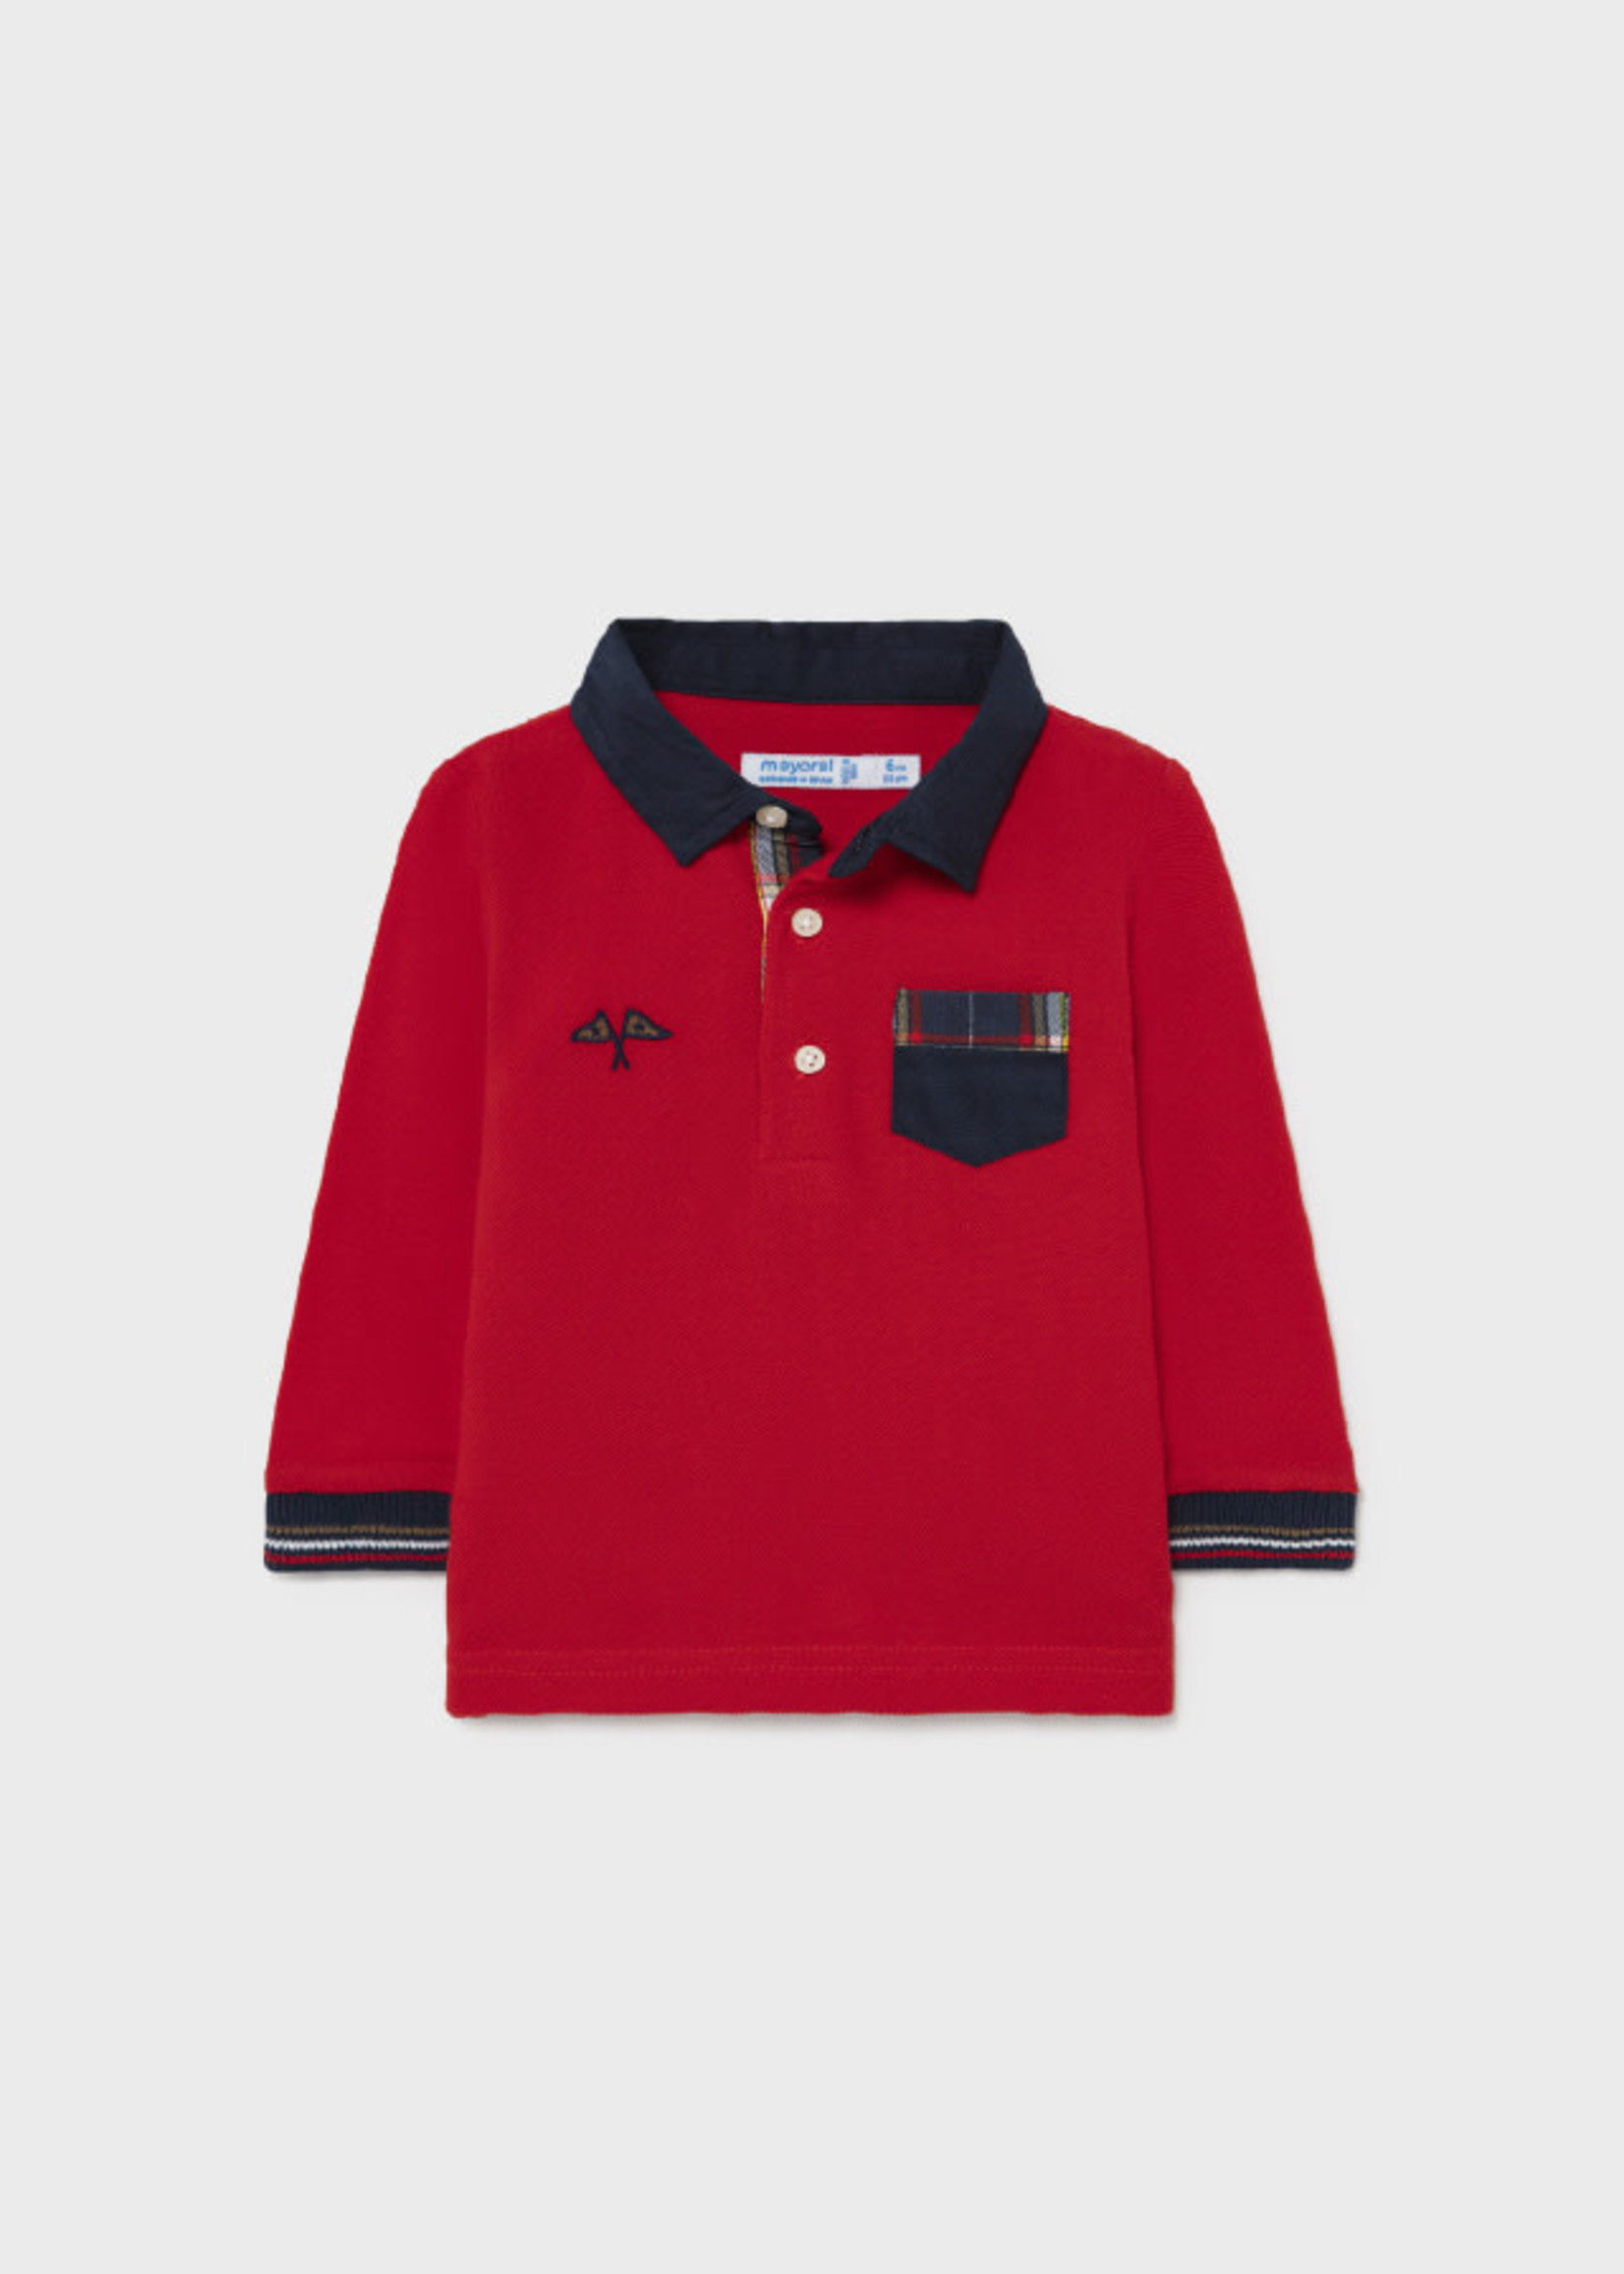 Mayoral Mayoral L/s Polo Red - 21 02139